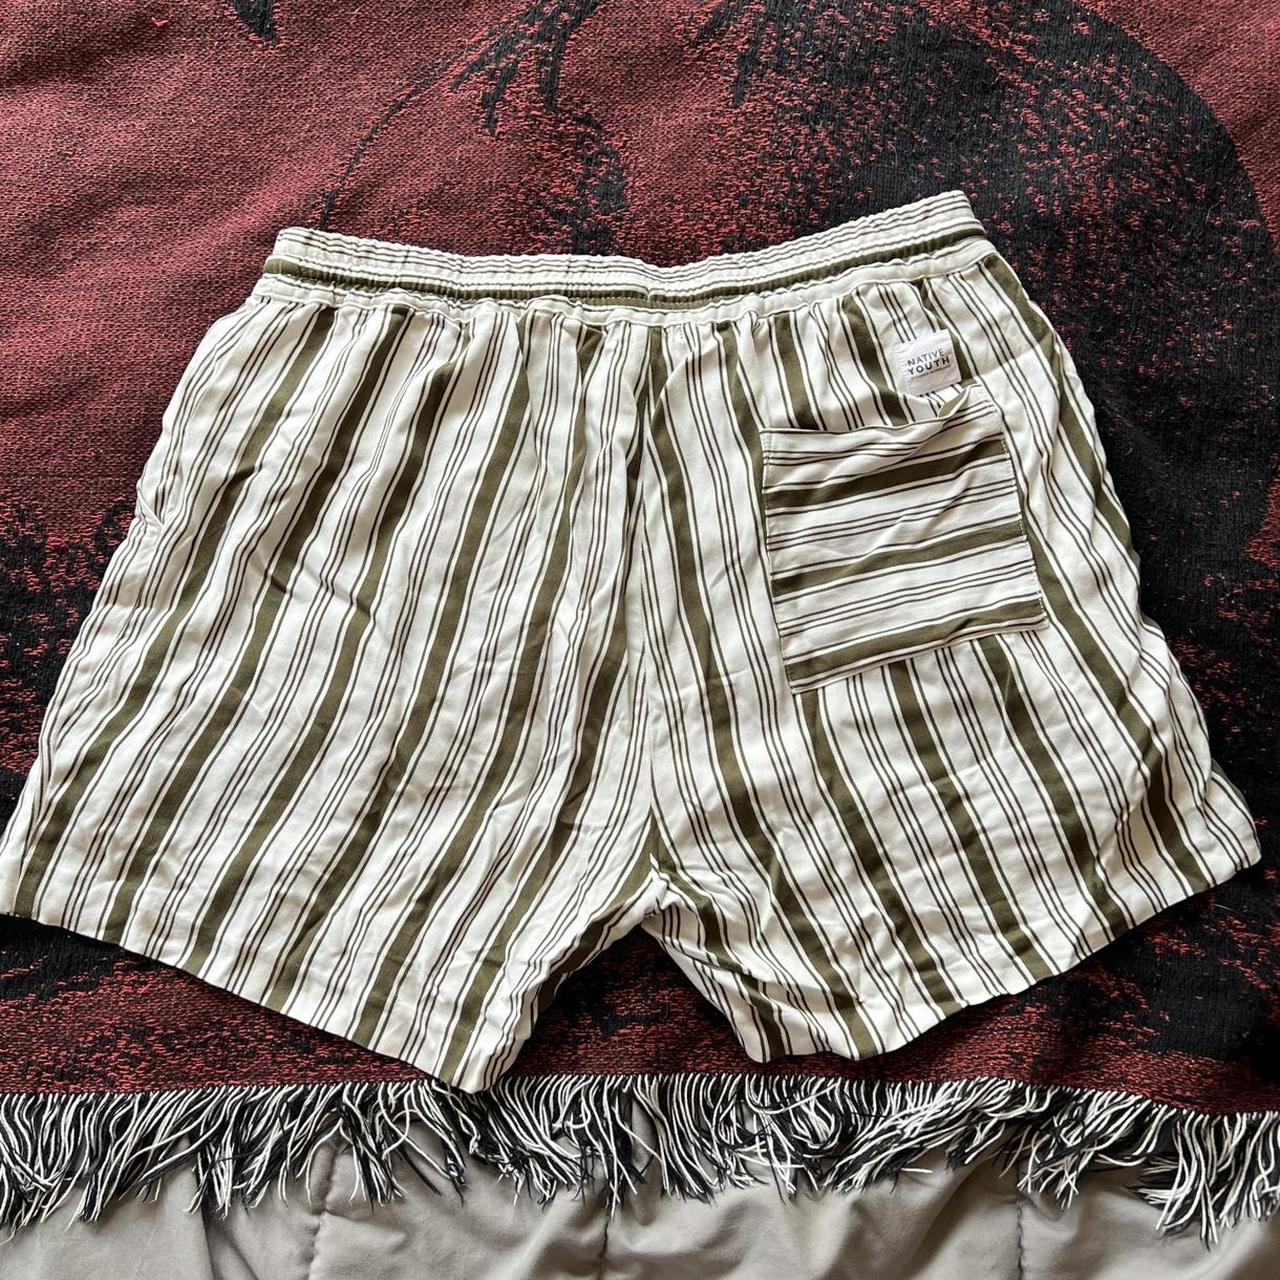 Native Youth Men's Green and White Shorts (2)